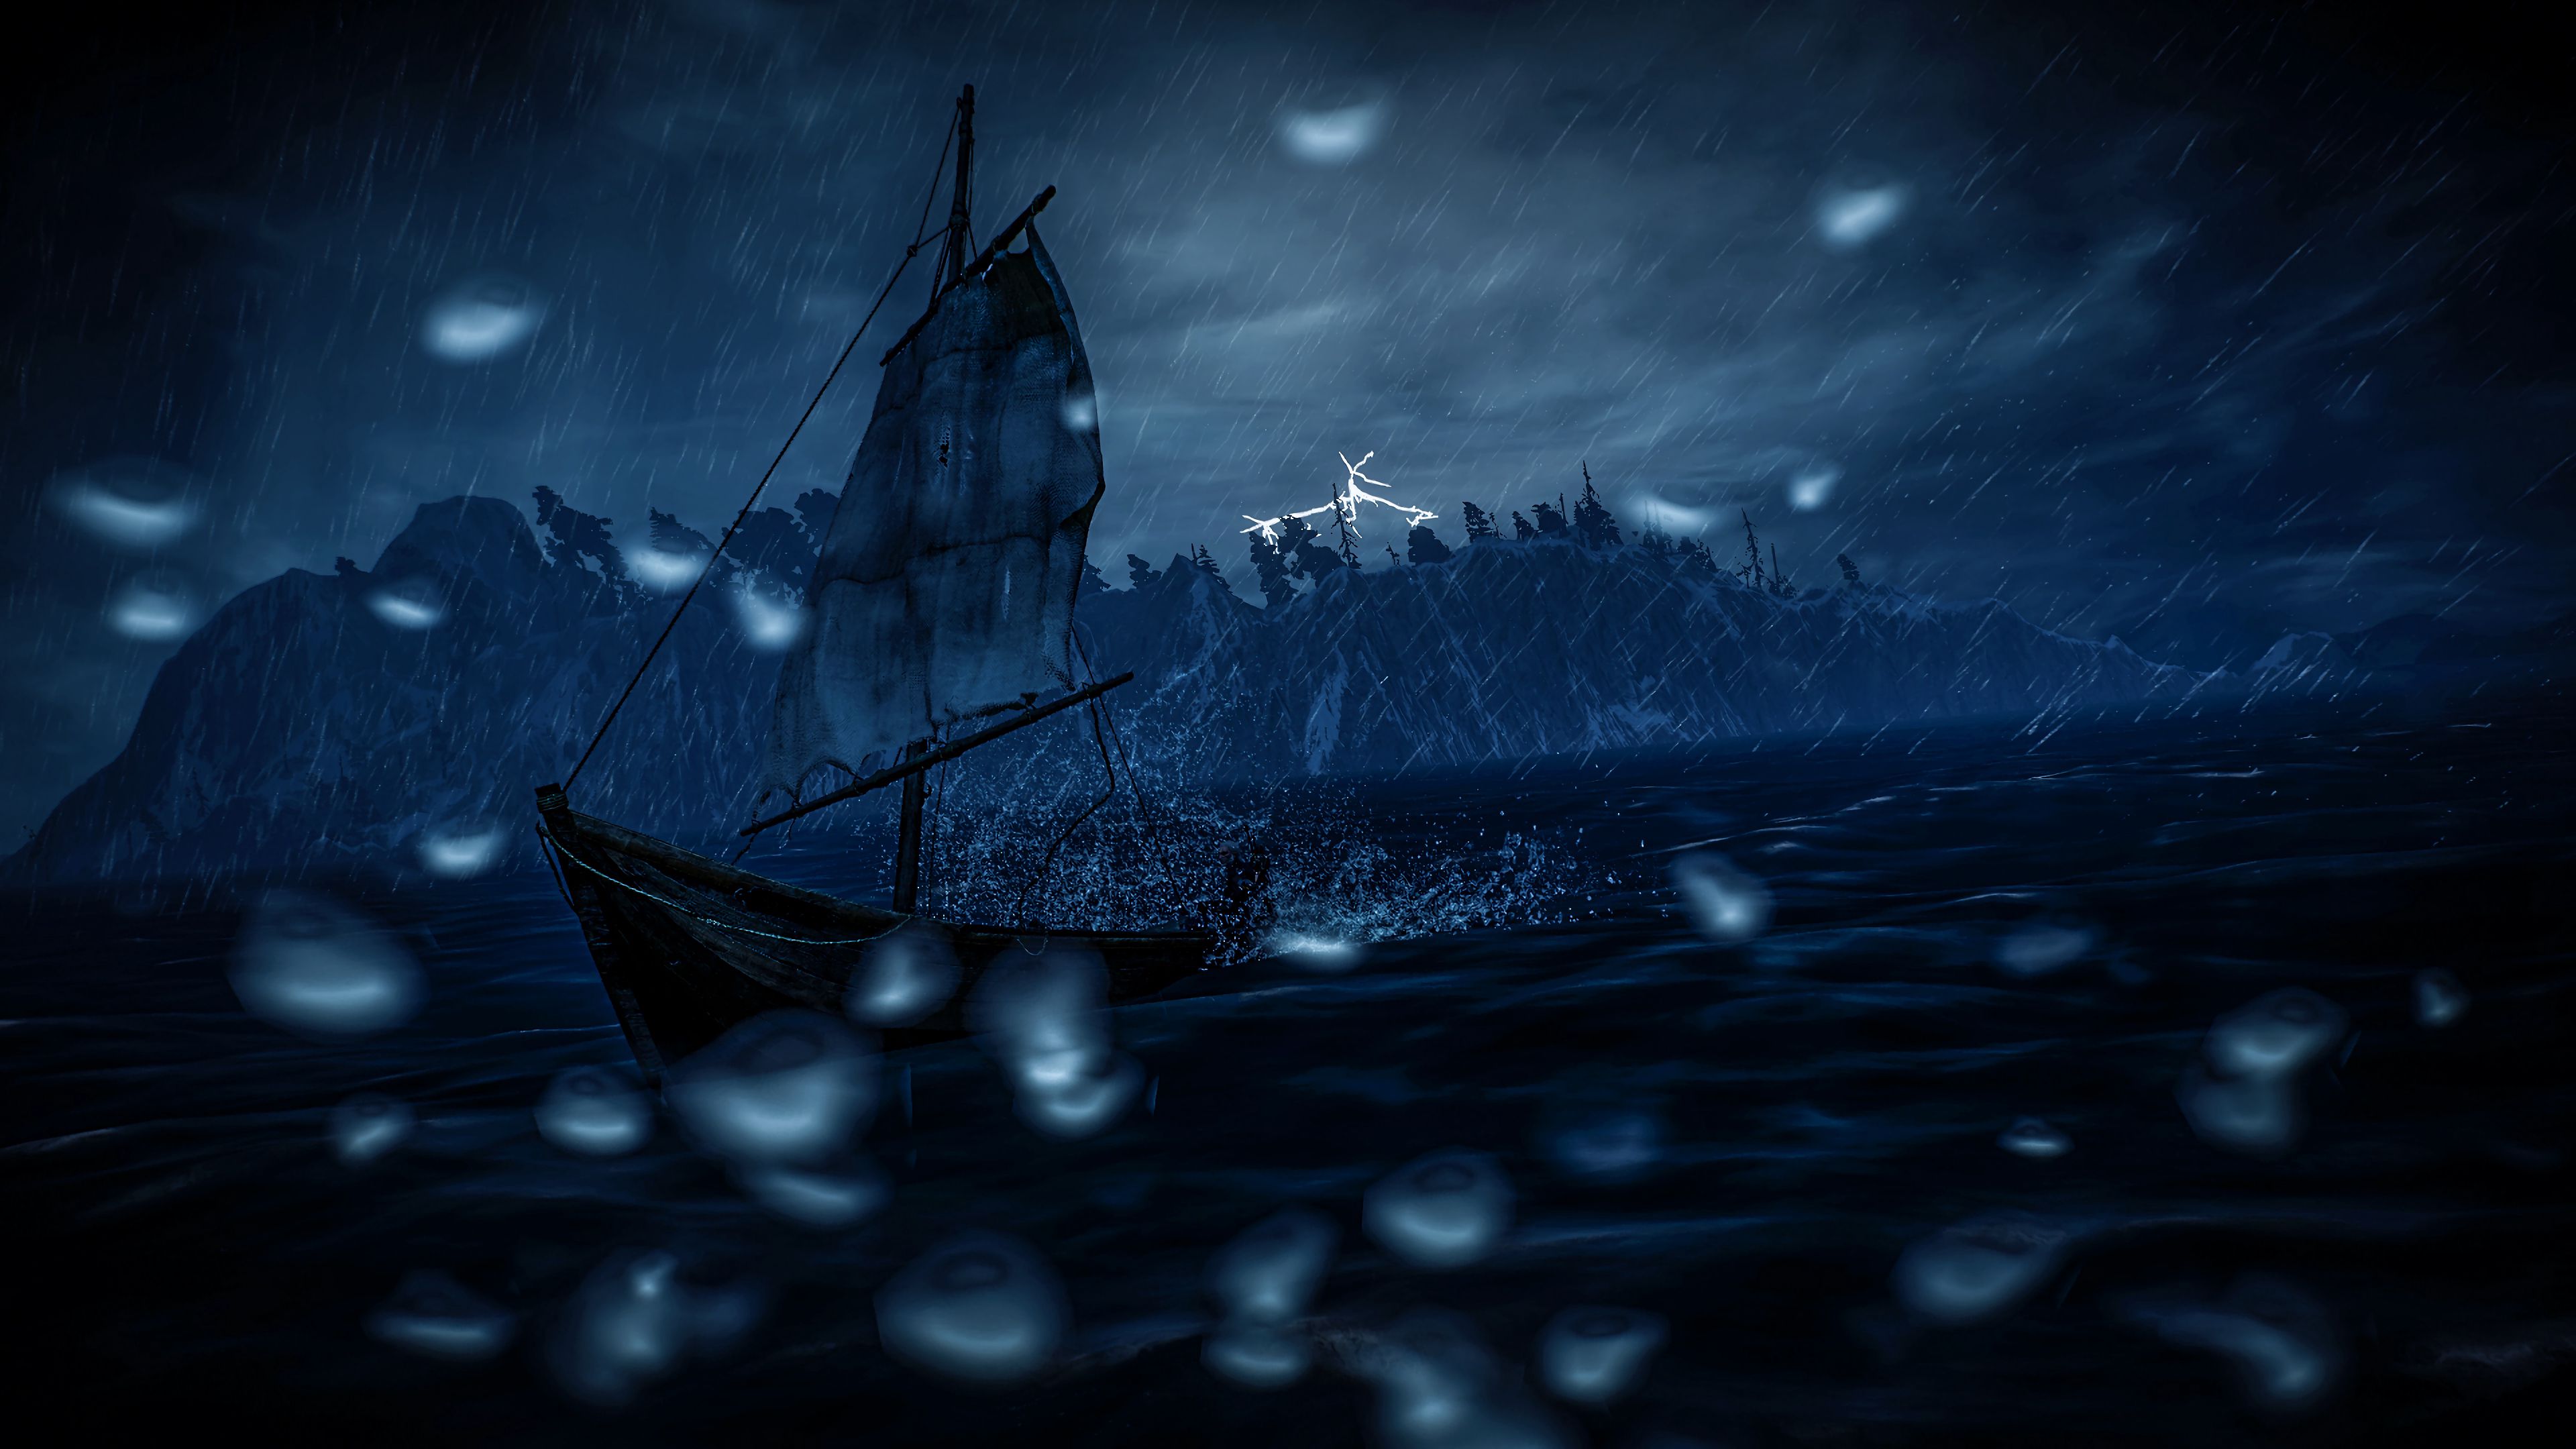 Wallpaper for mobile devices dark, storm, boat